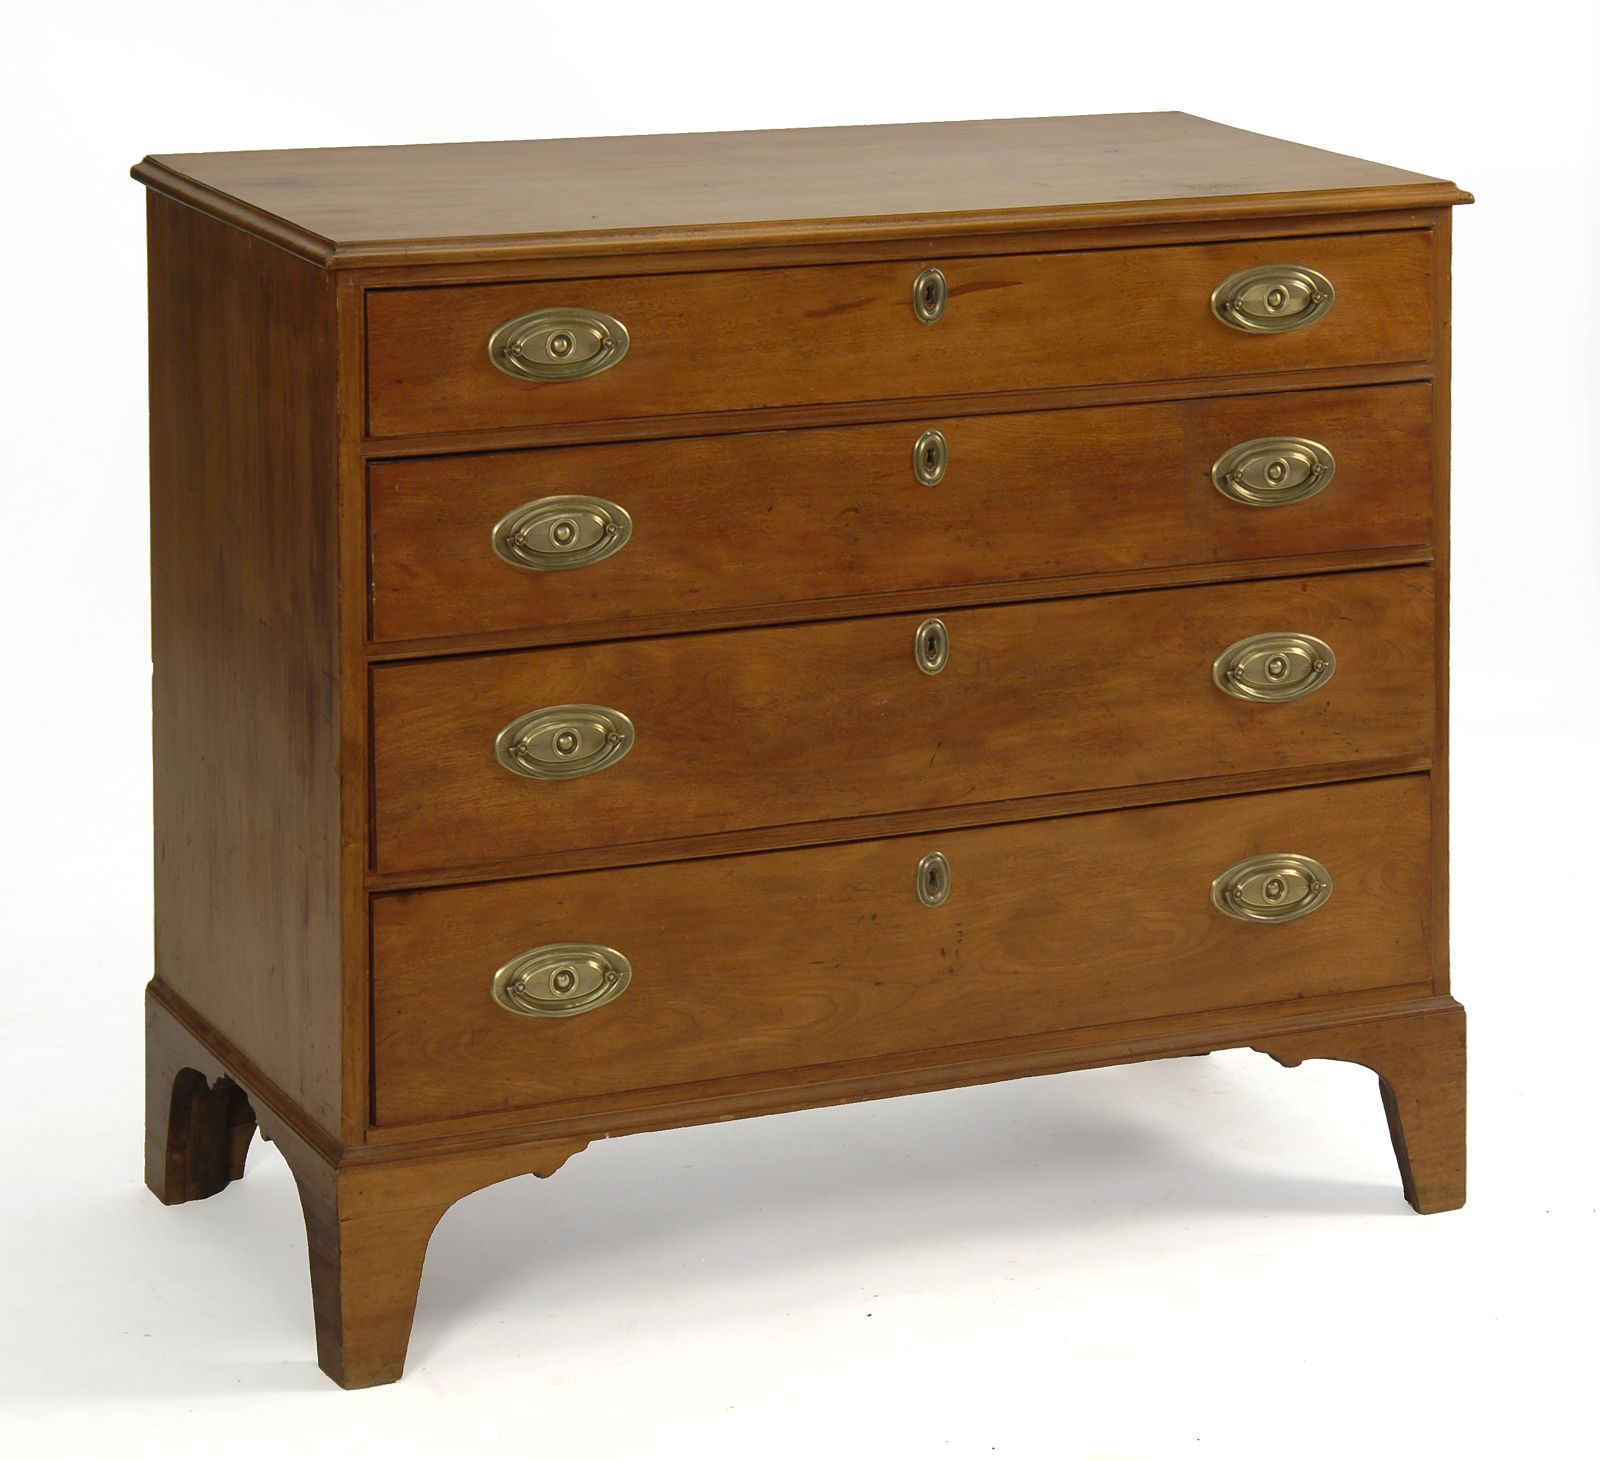 ANTIQUE AMERICAN FOUR-DRAWER CHESTLate